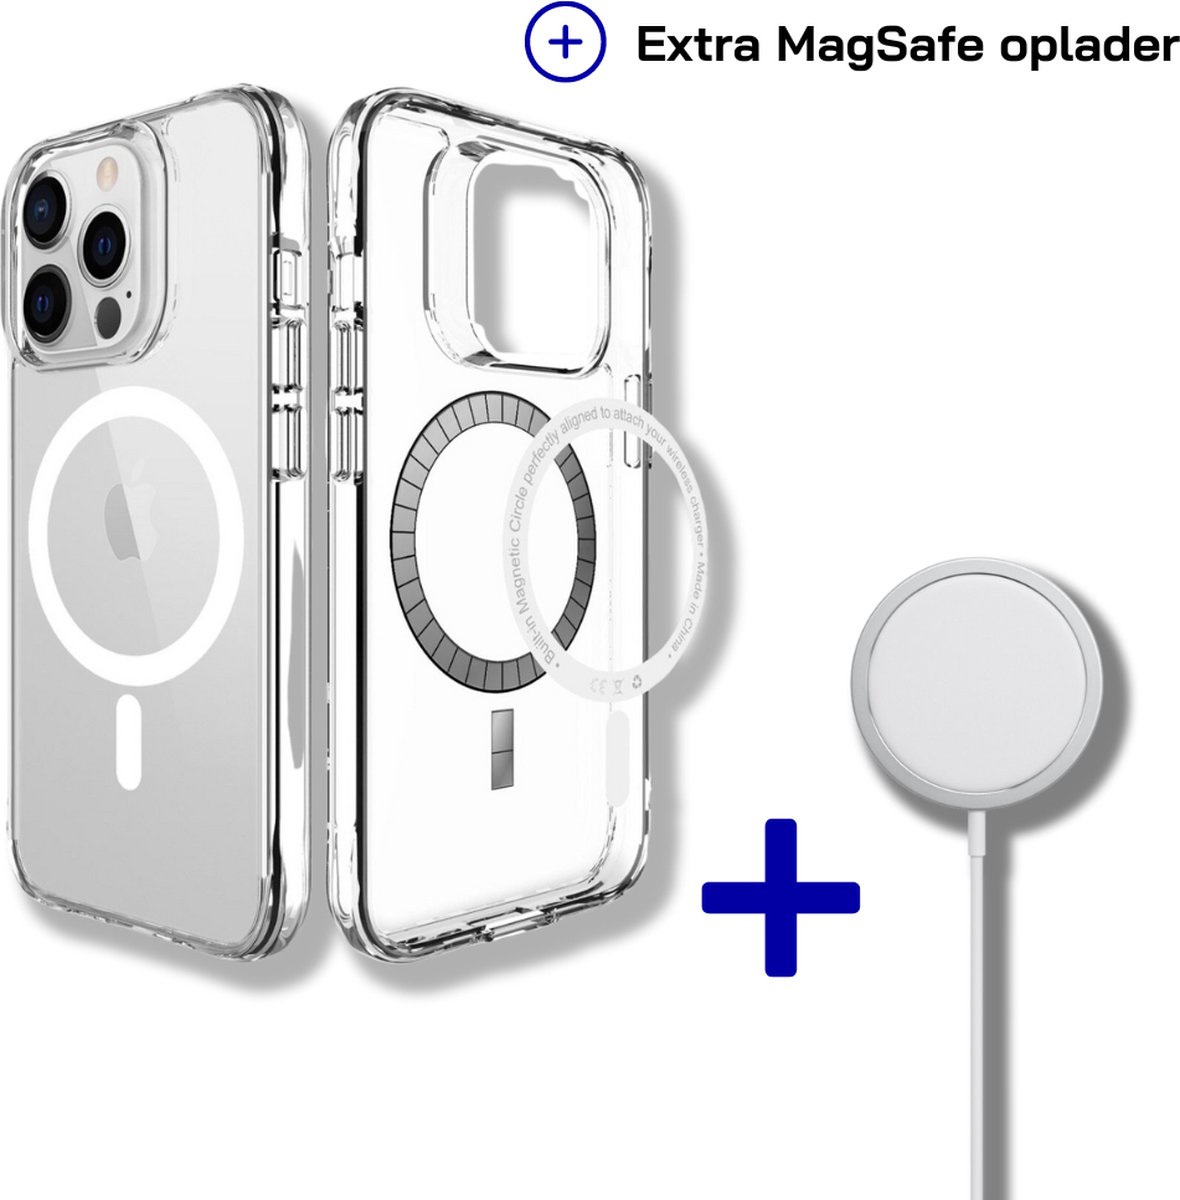 Napolic hoesje magsafe transparant geschikt voor iphone 13 pro max - inclusief magsafe oplader - magsafe hoesje - iphone case